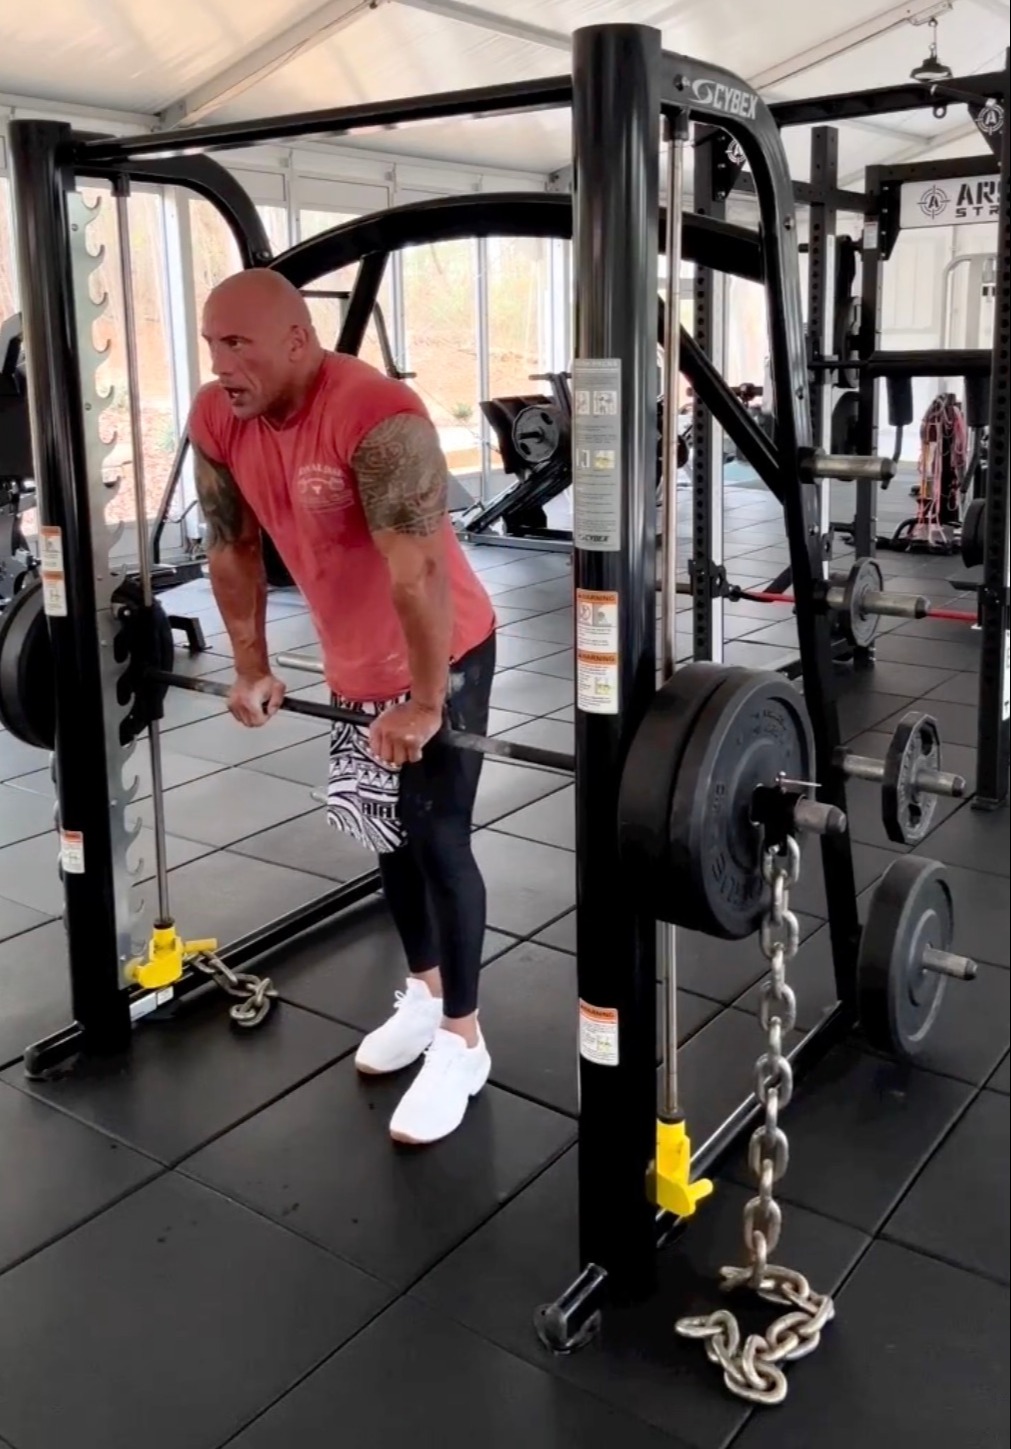 Bodybuilder Victor Martinez says Dwayne Johnson can't afford to get injured so he trains carefully and precisely